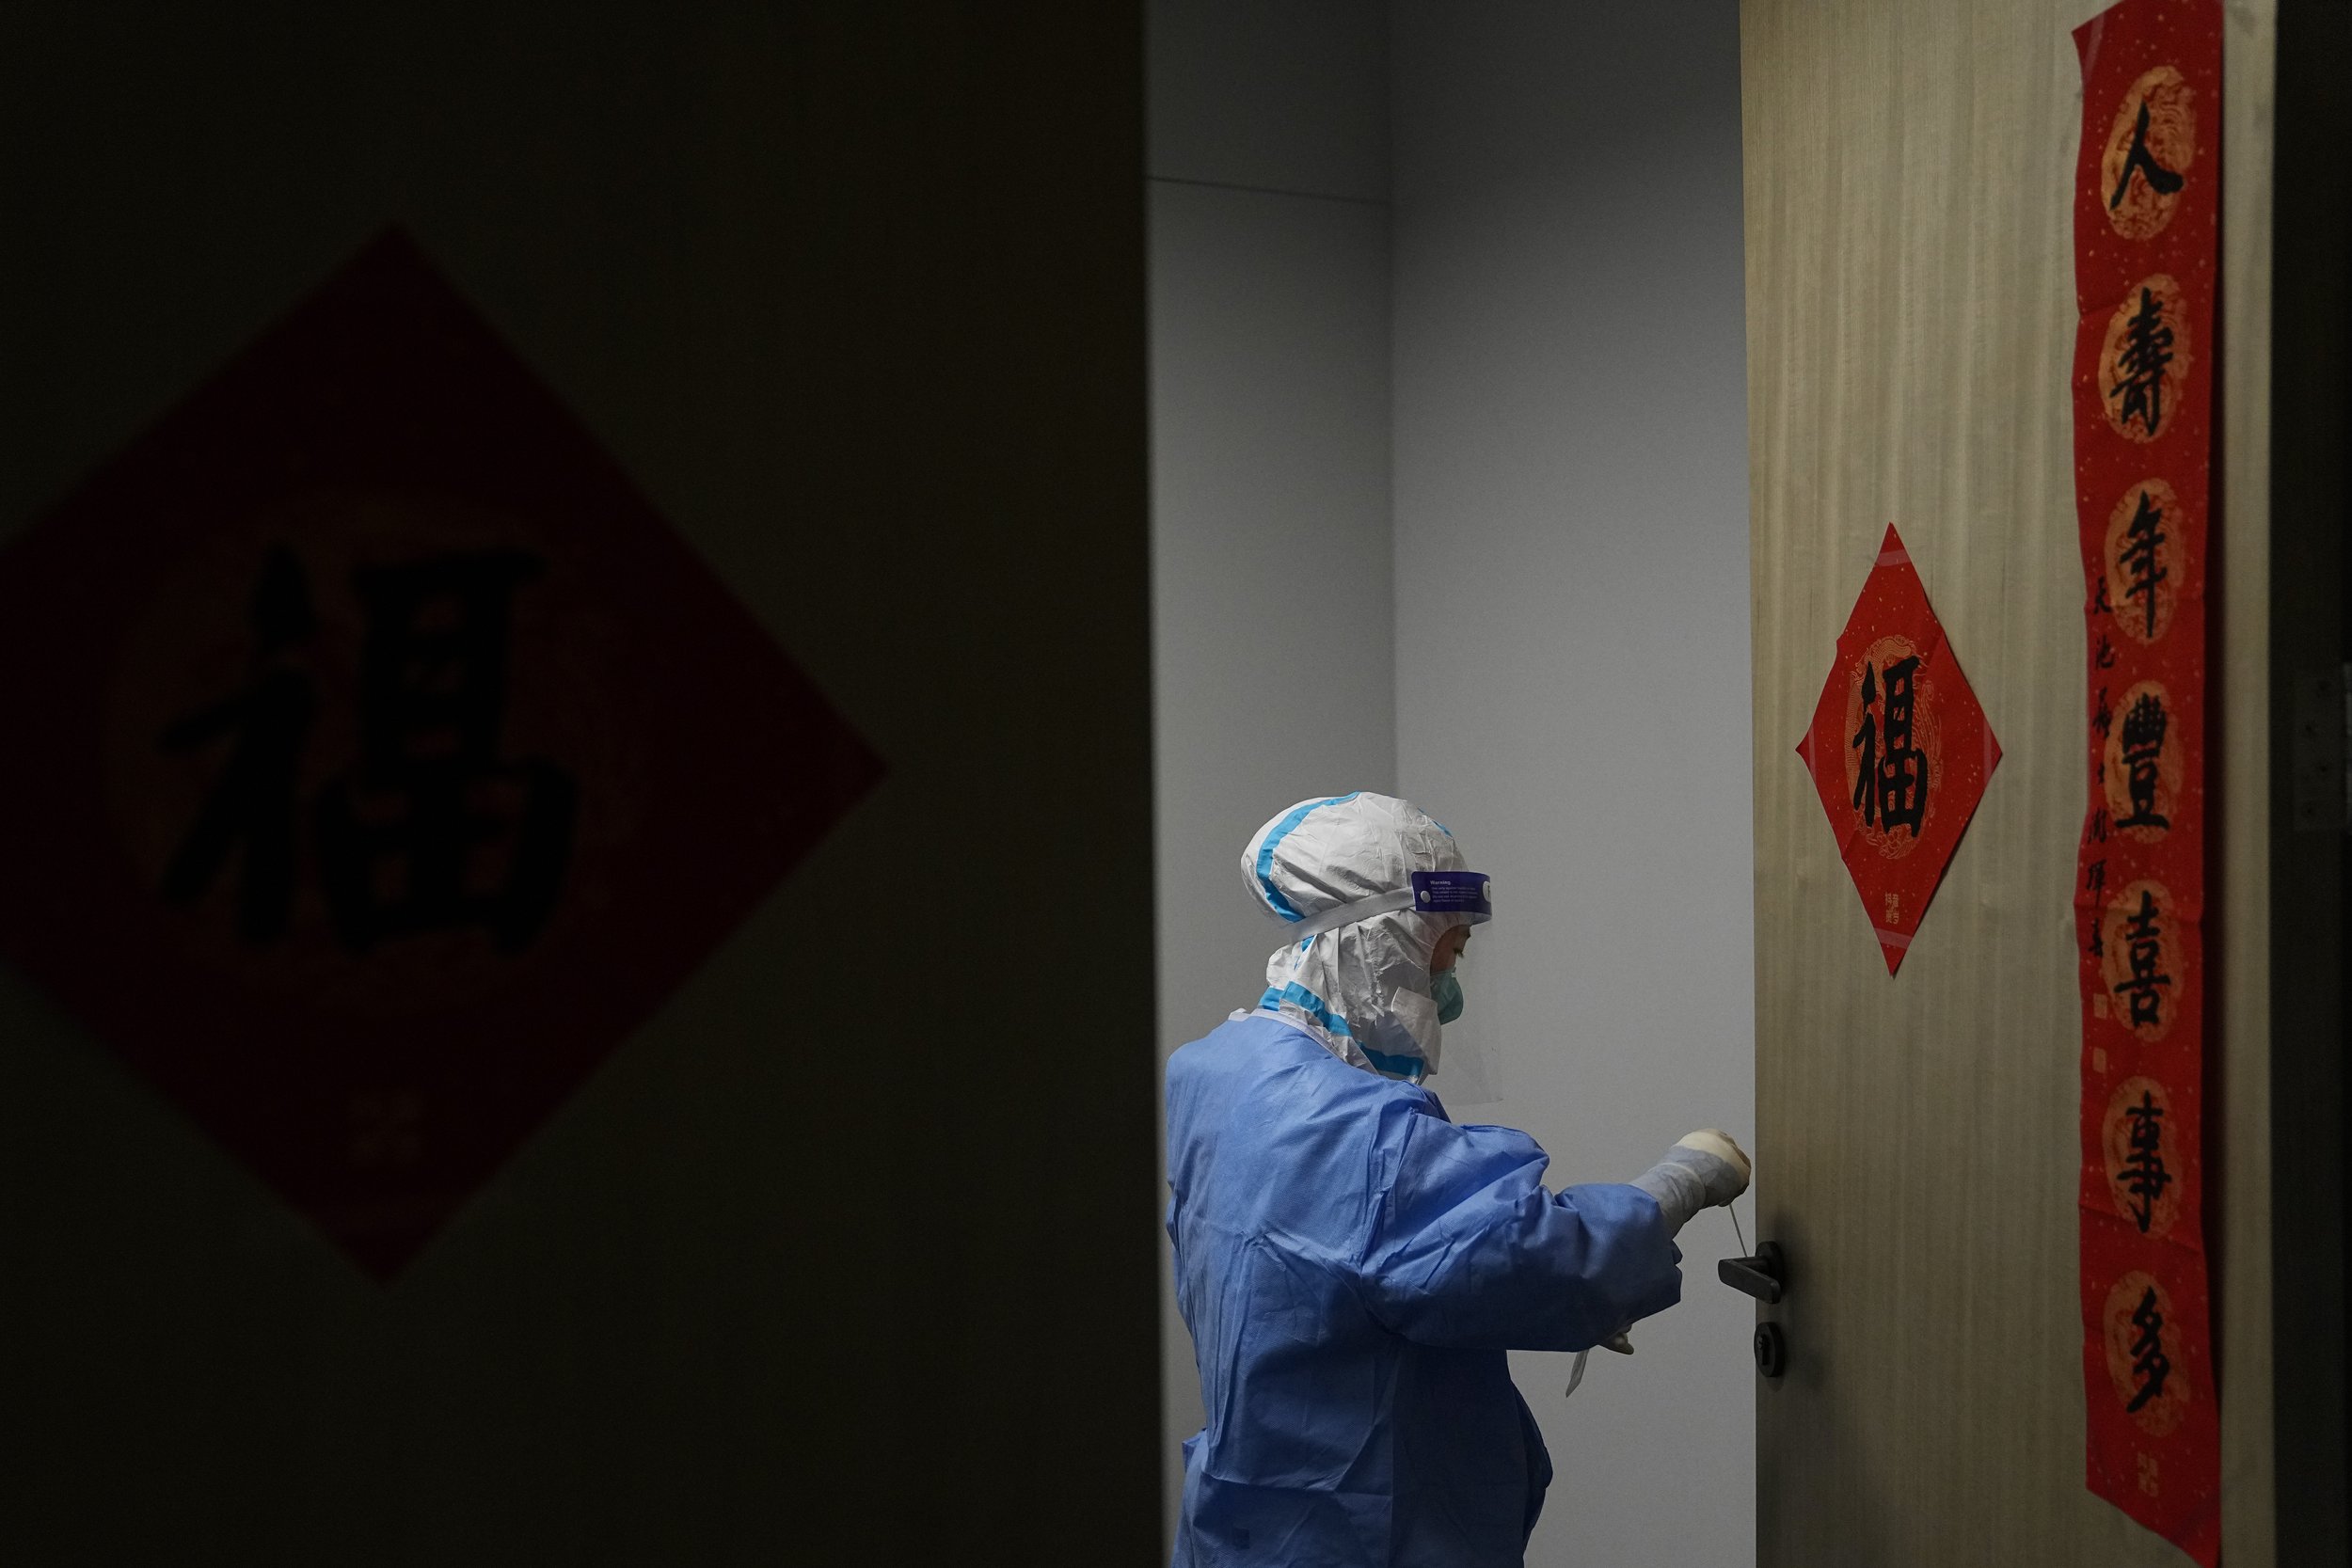  A medical worker collects a sample from a door knob of an office to test for COVID-19 in the main media center at the 2022 Winter Olympics, Friday, Feb. 11, 2022, in Beijing. (AP Photo/Jae C. Hong) 